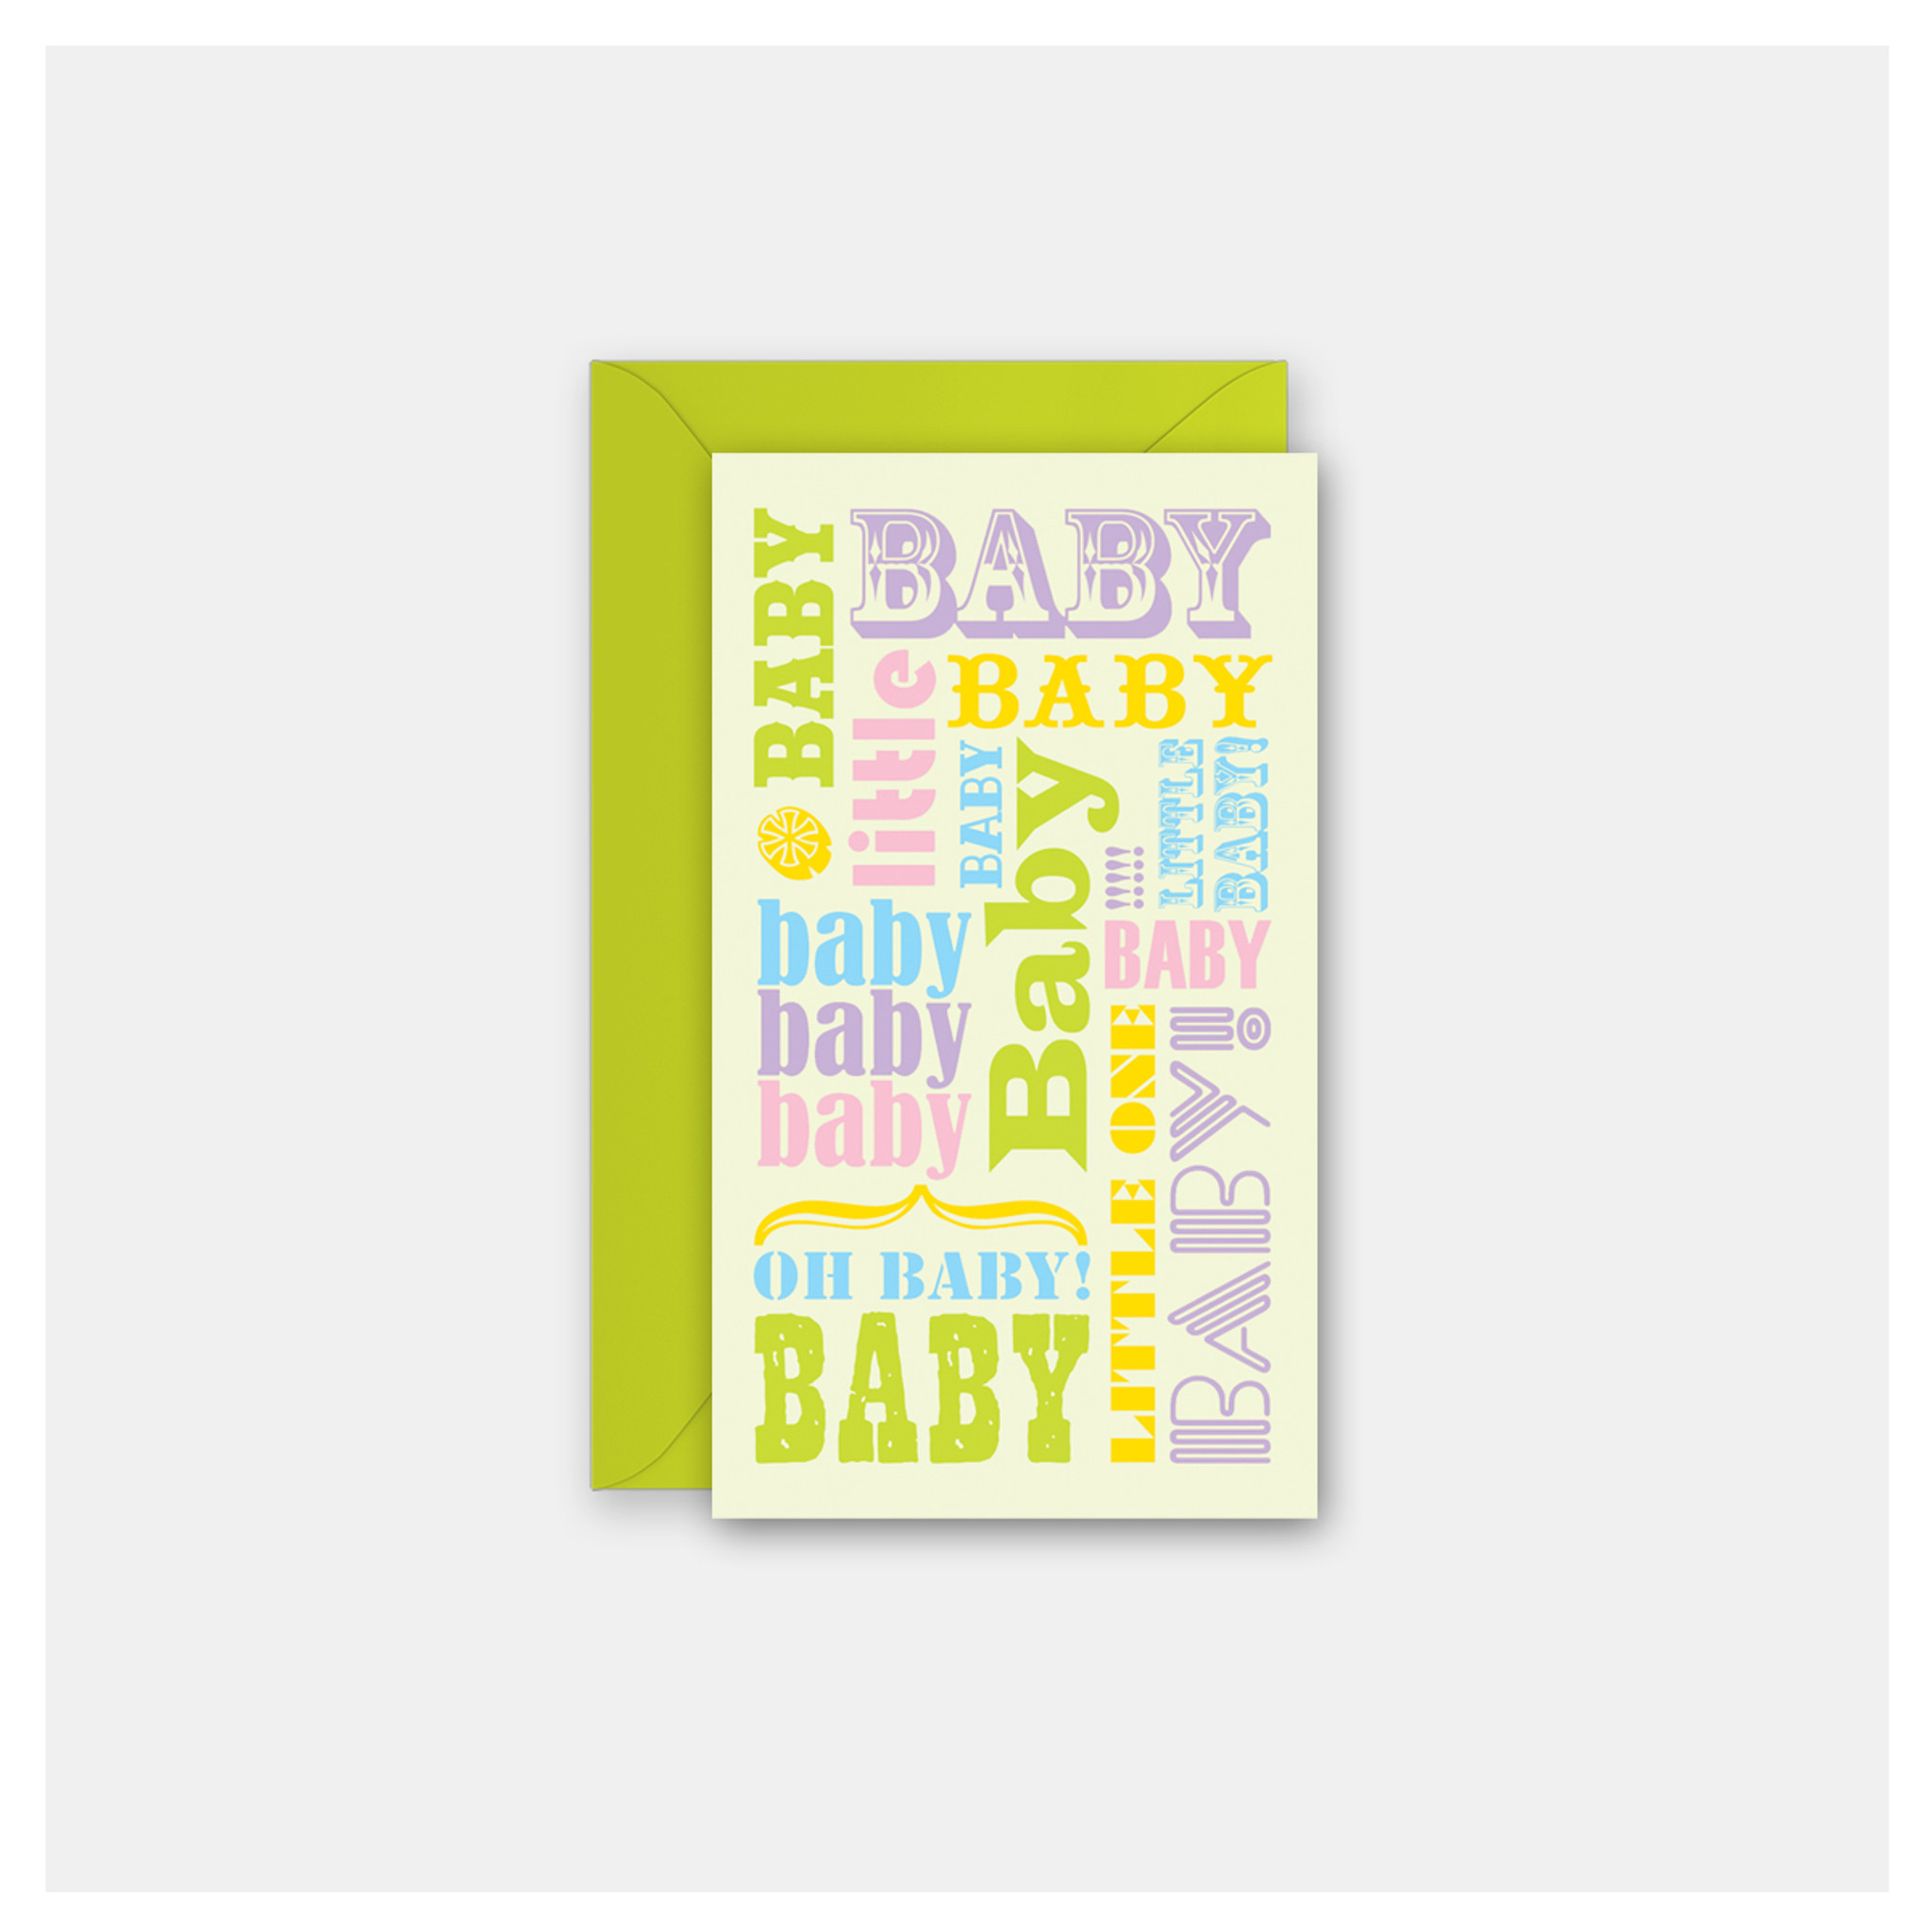 Baby Words - Set of 4 Mini Cards